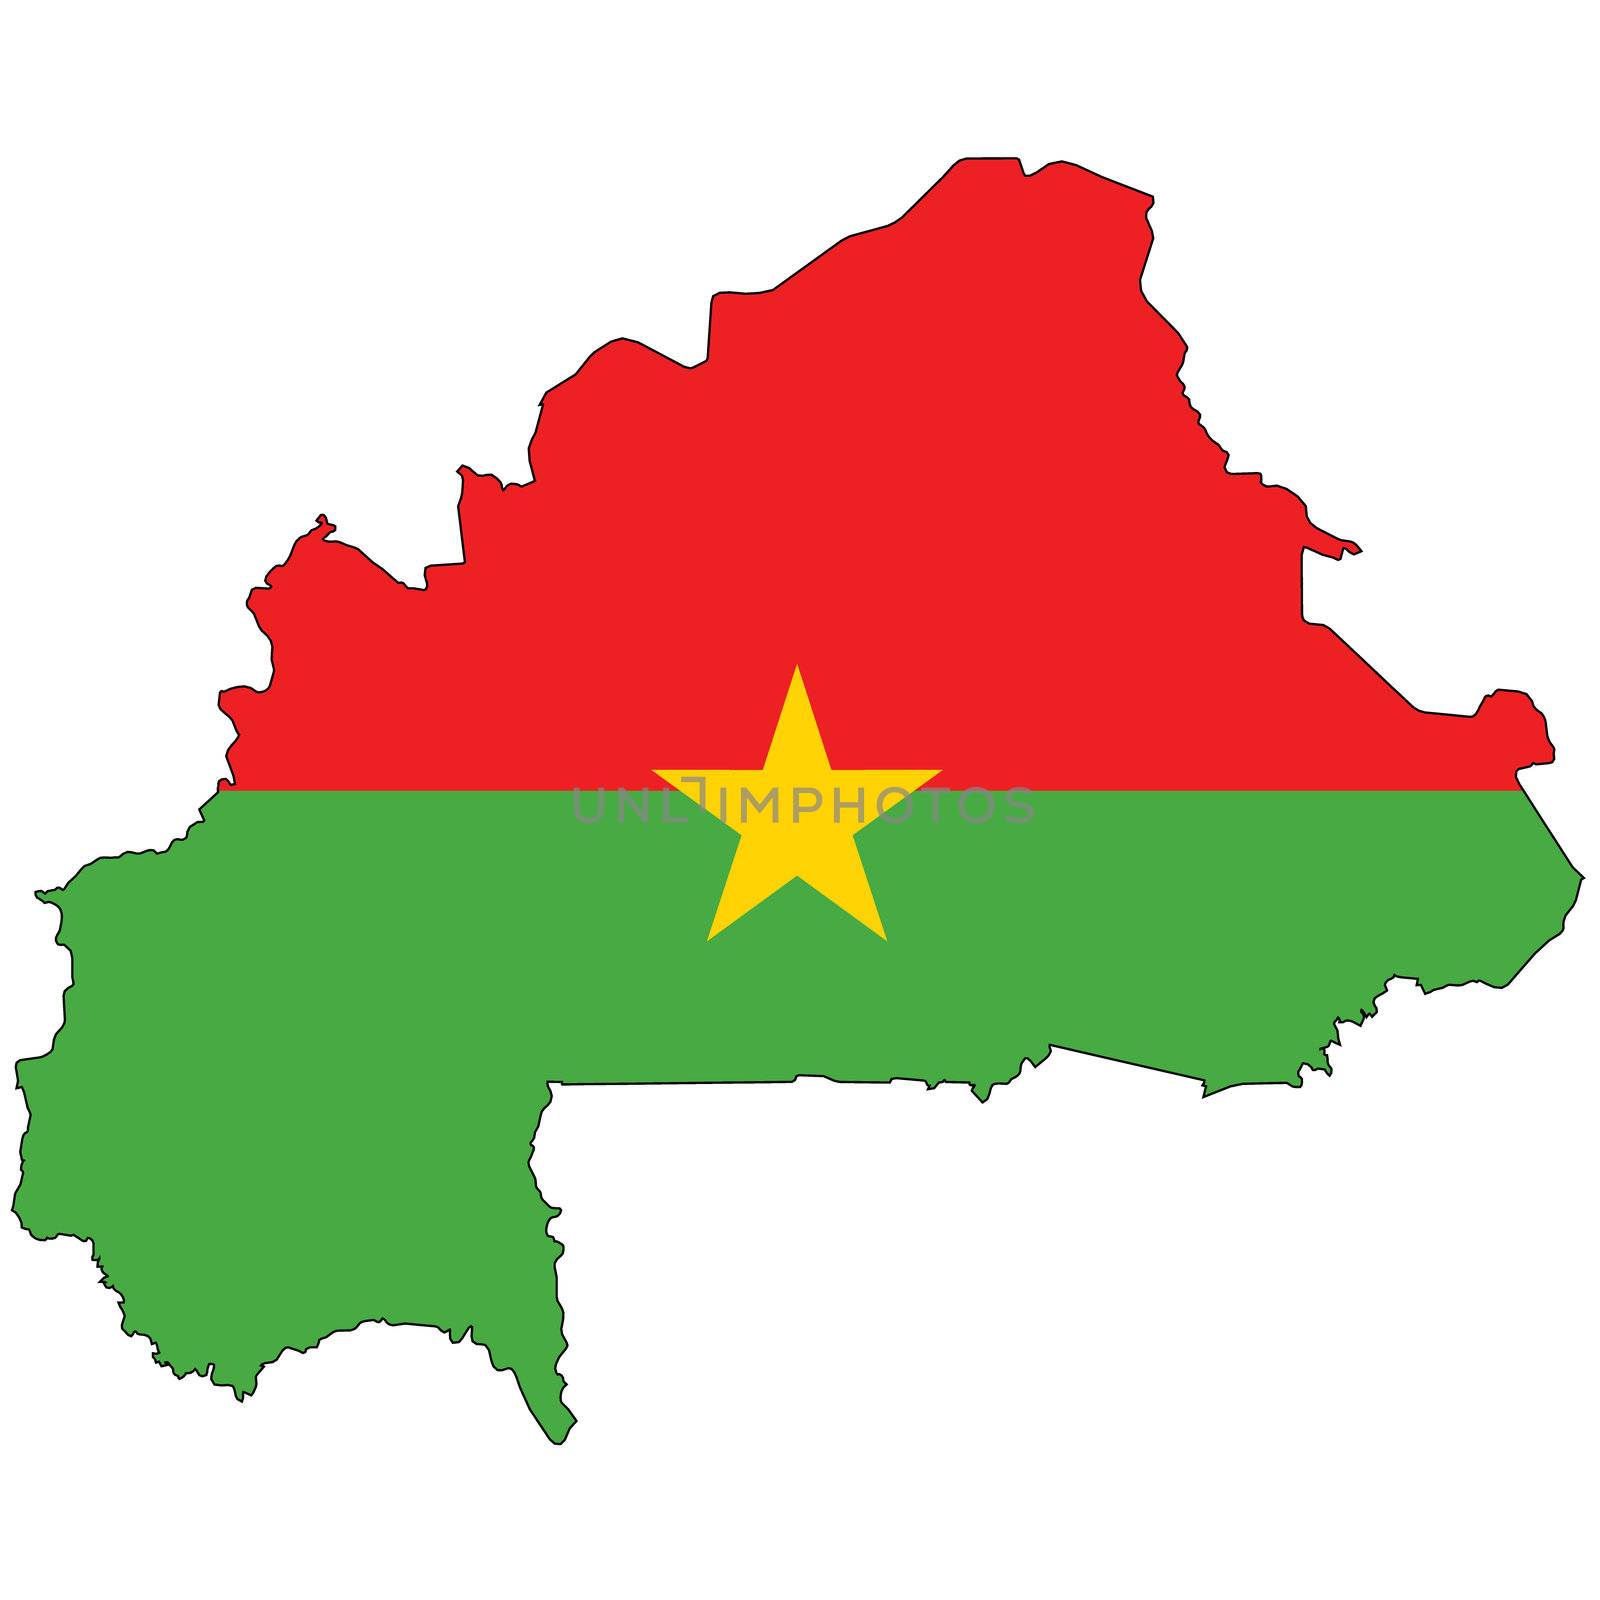 Country outline with the flag of Burkina Faso in it